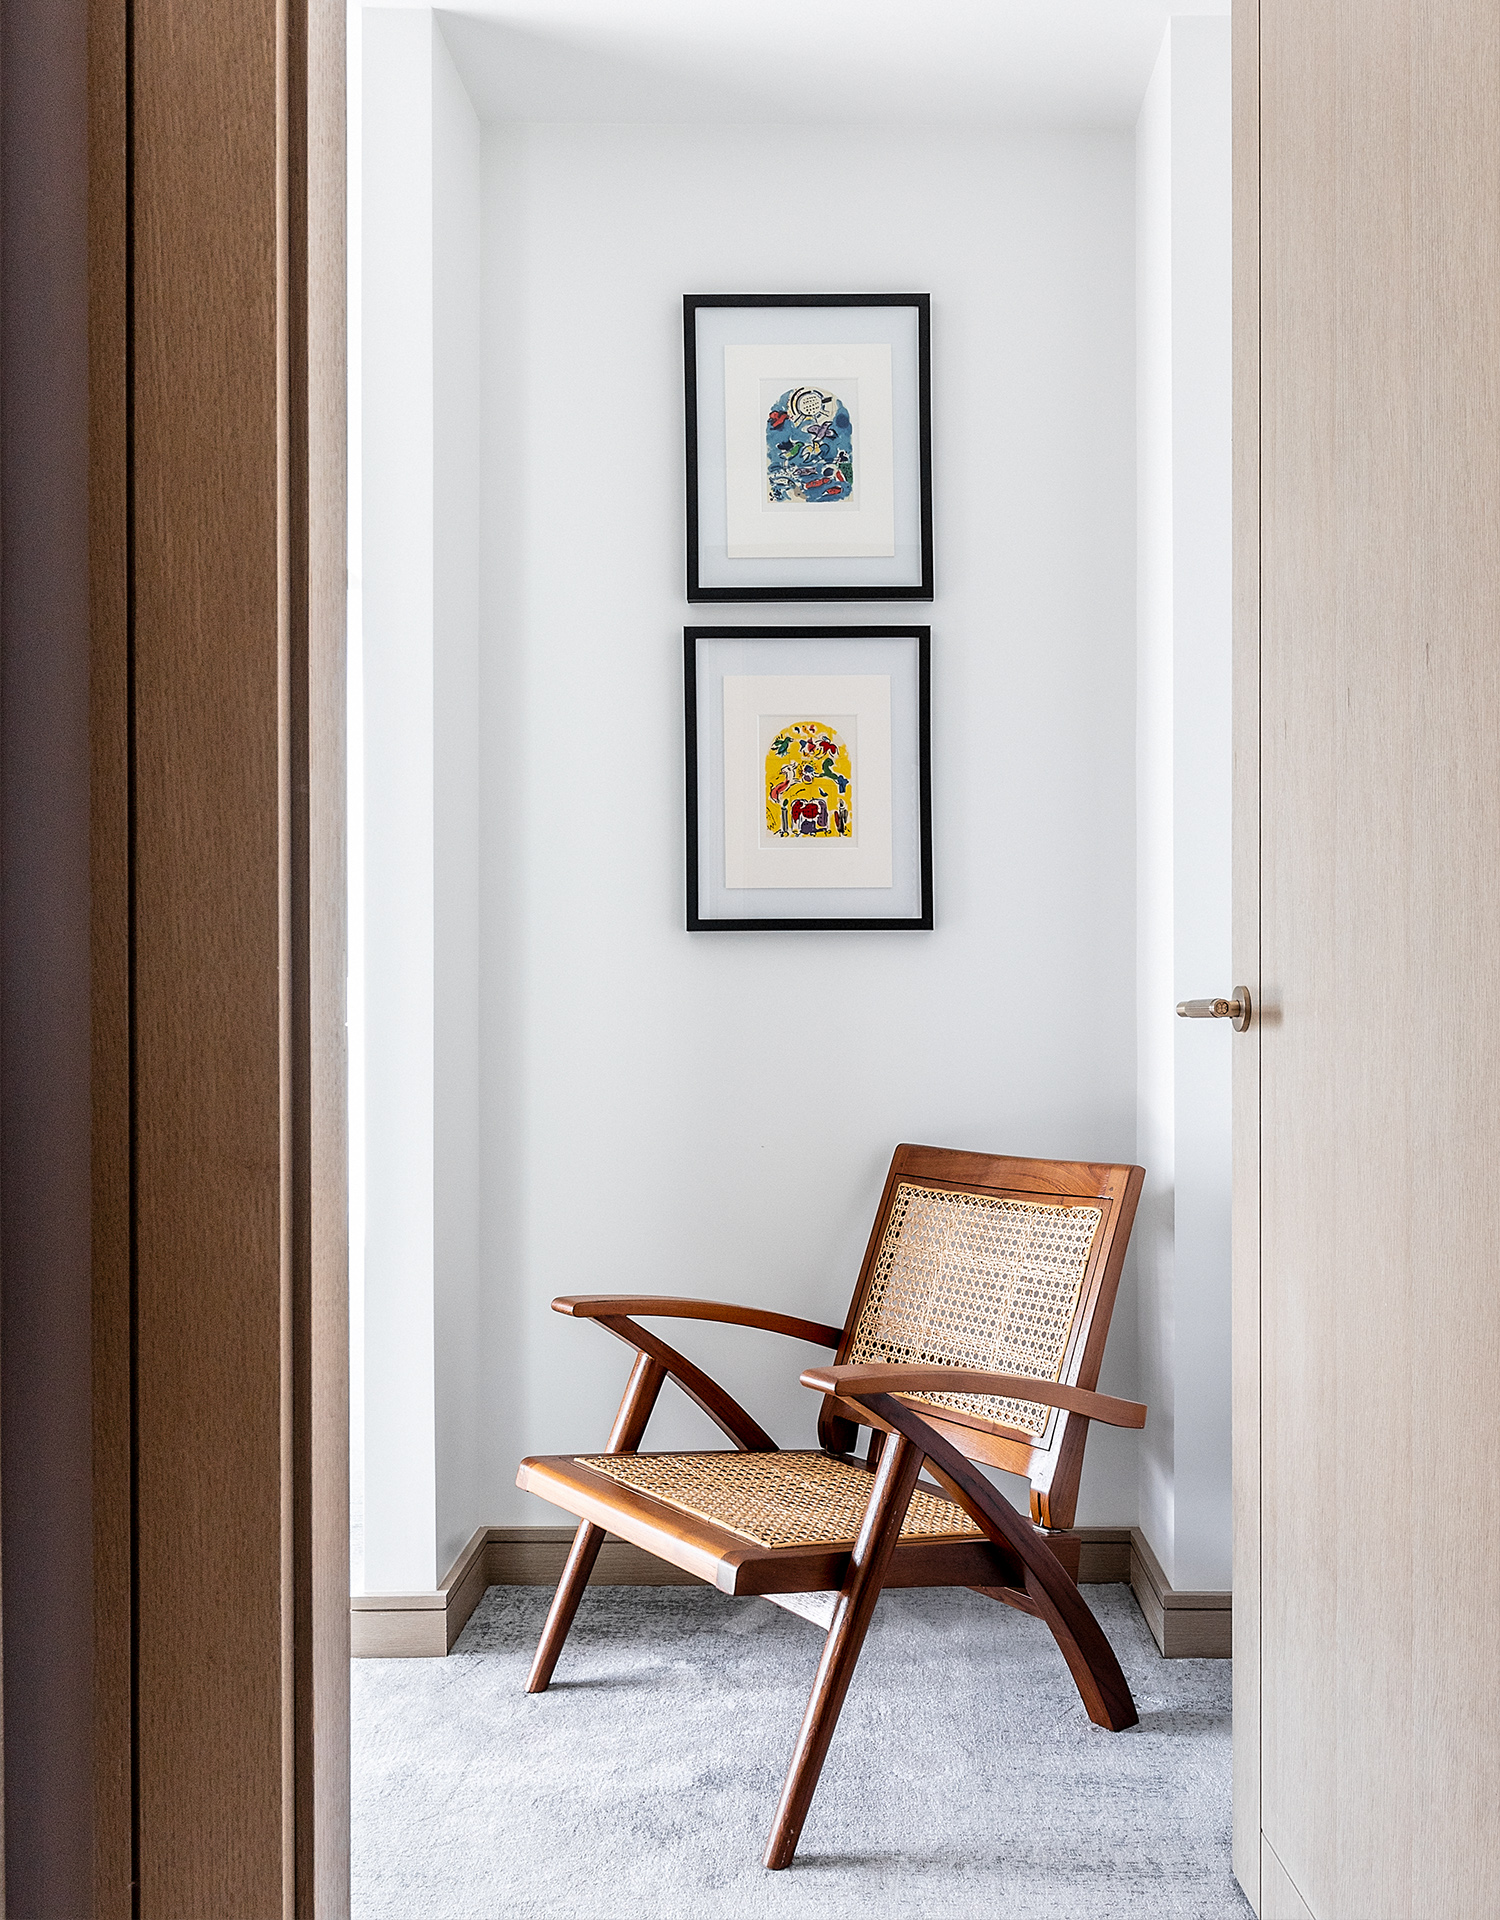 One St. John's Wood | Wooden chair beneath colourful artwork| Angel O'Donnell